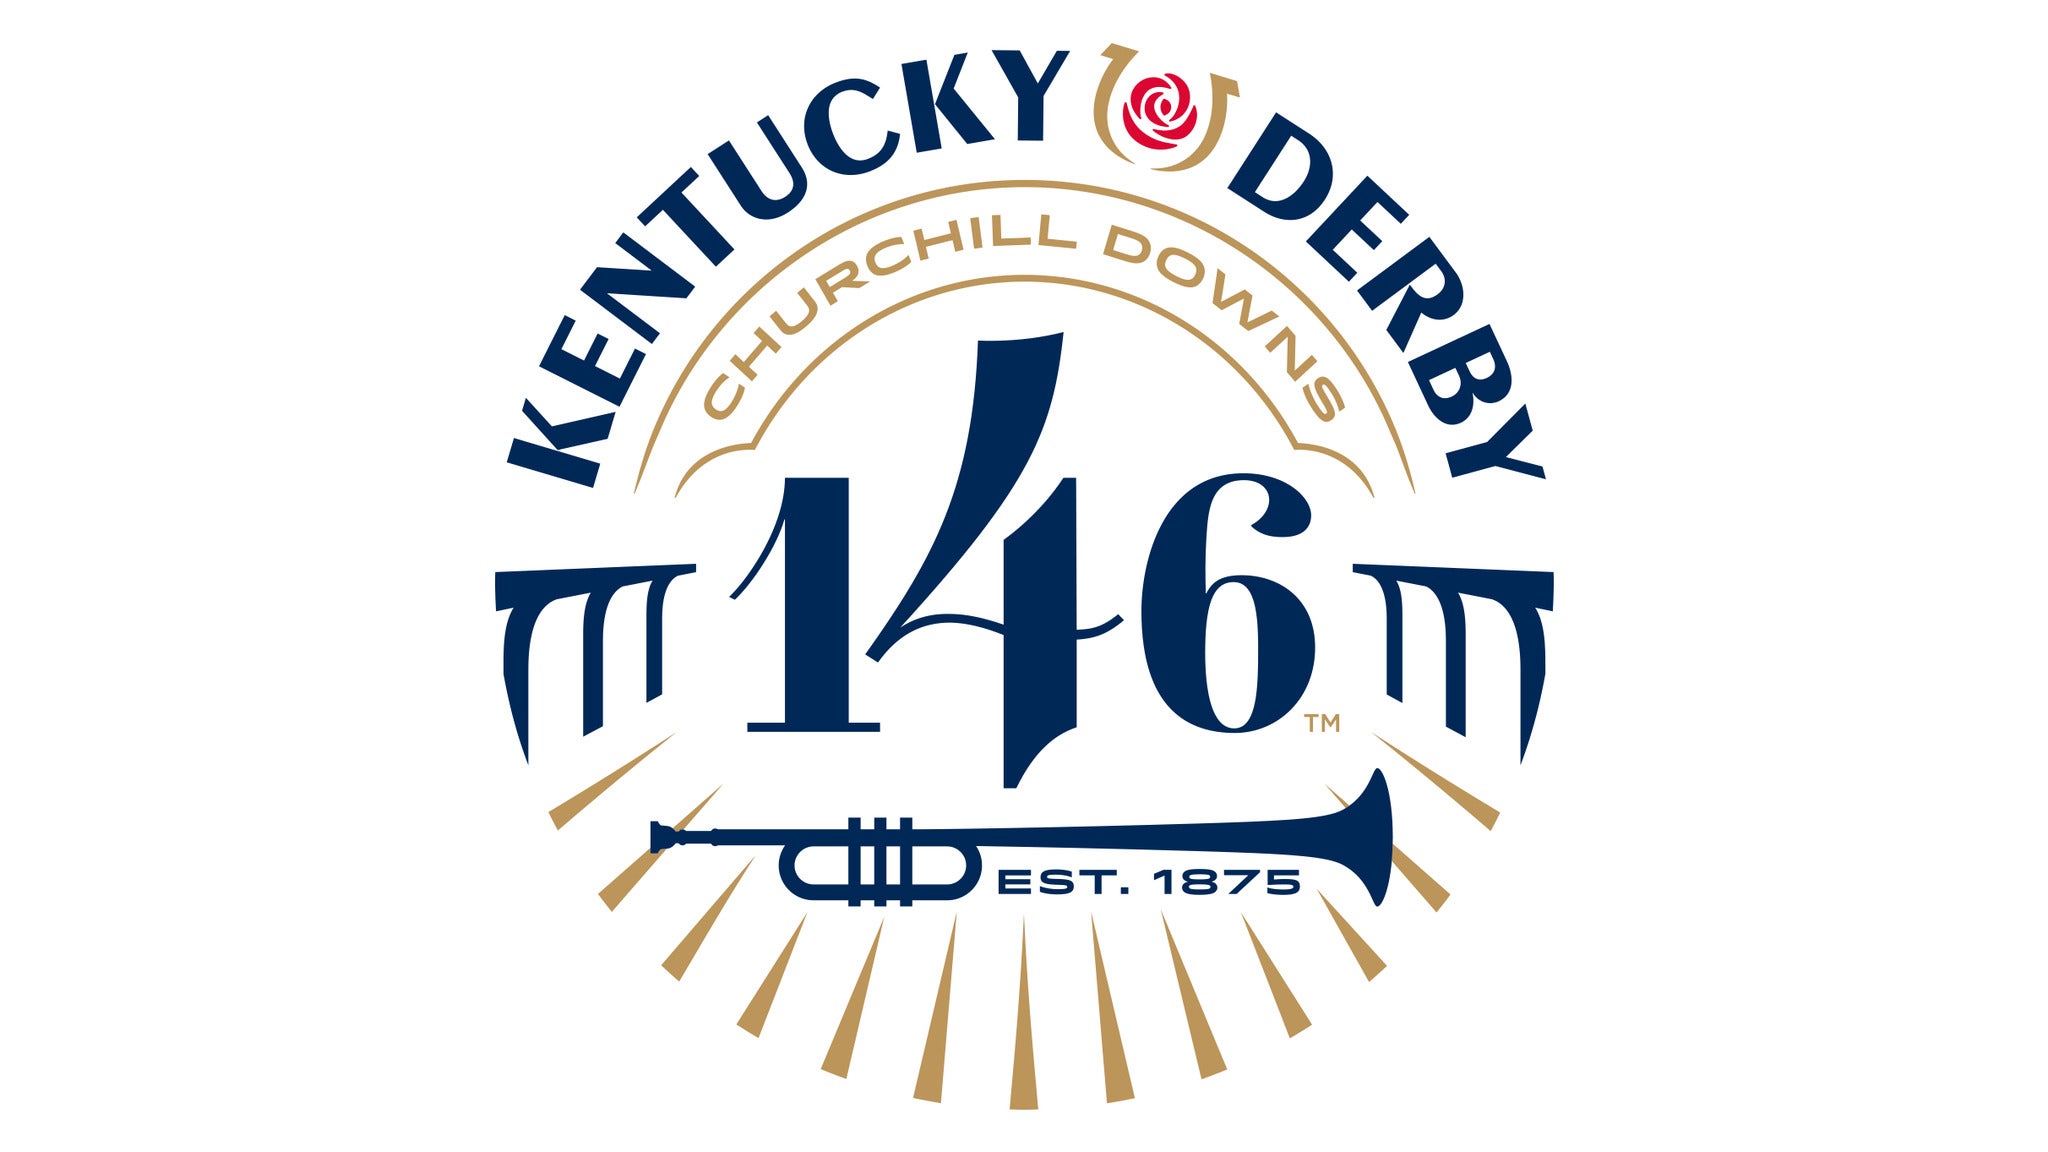 145th Kentucky Derby & Kentucky Oaks  - Reserved Dining Plan in Louisville promo photo for Registered Patron presale offer code